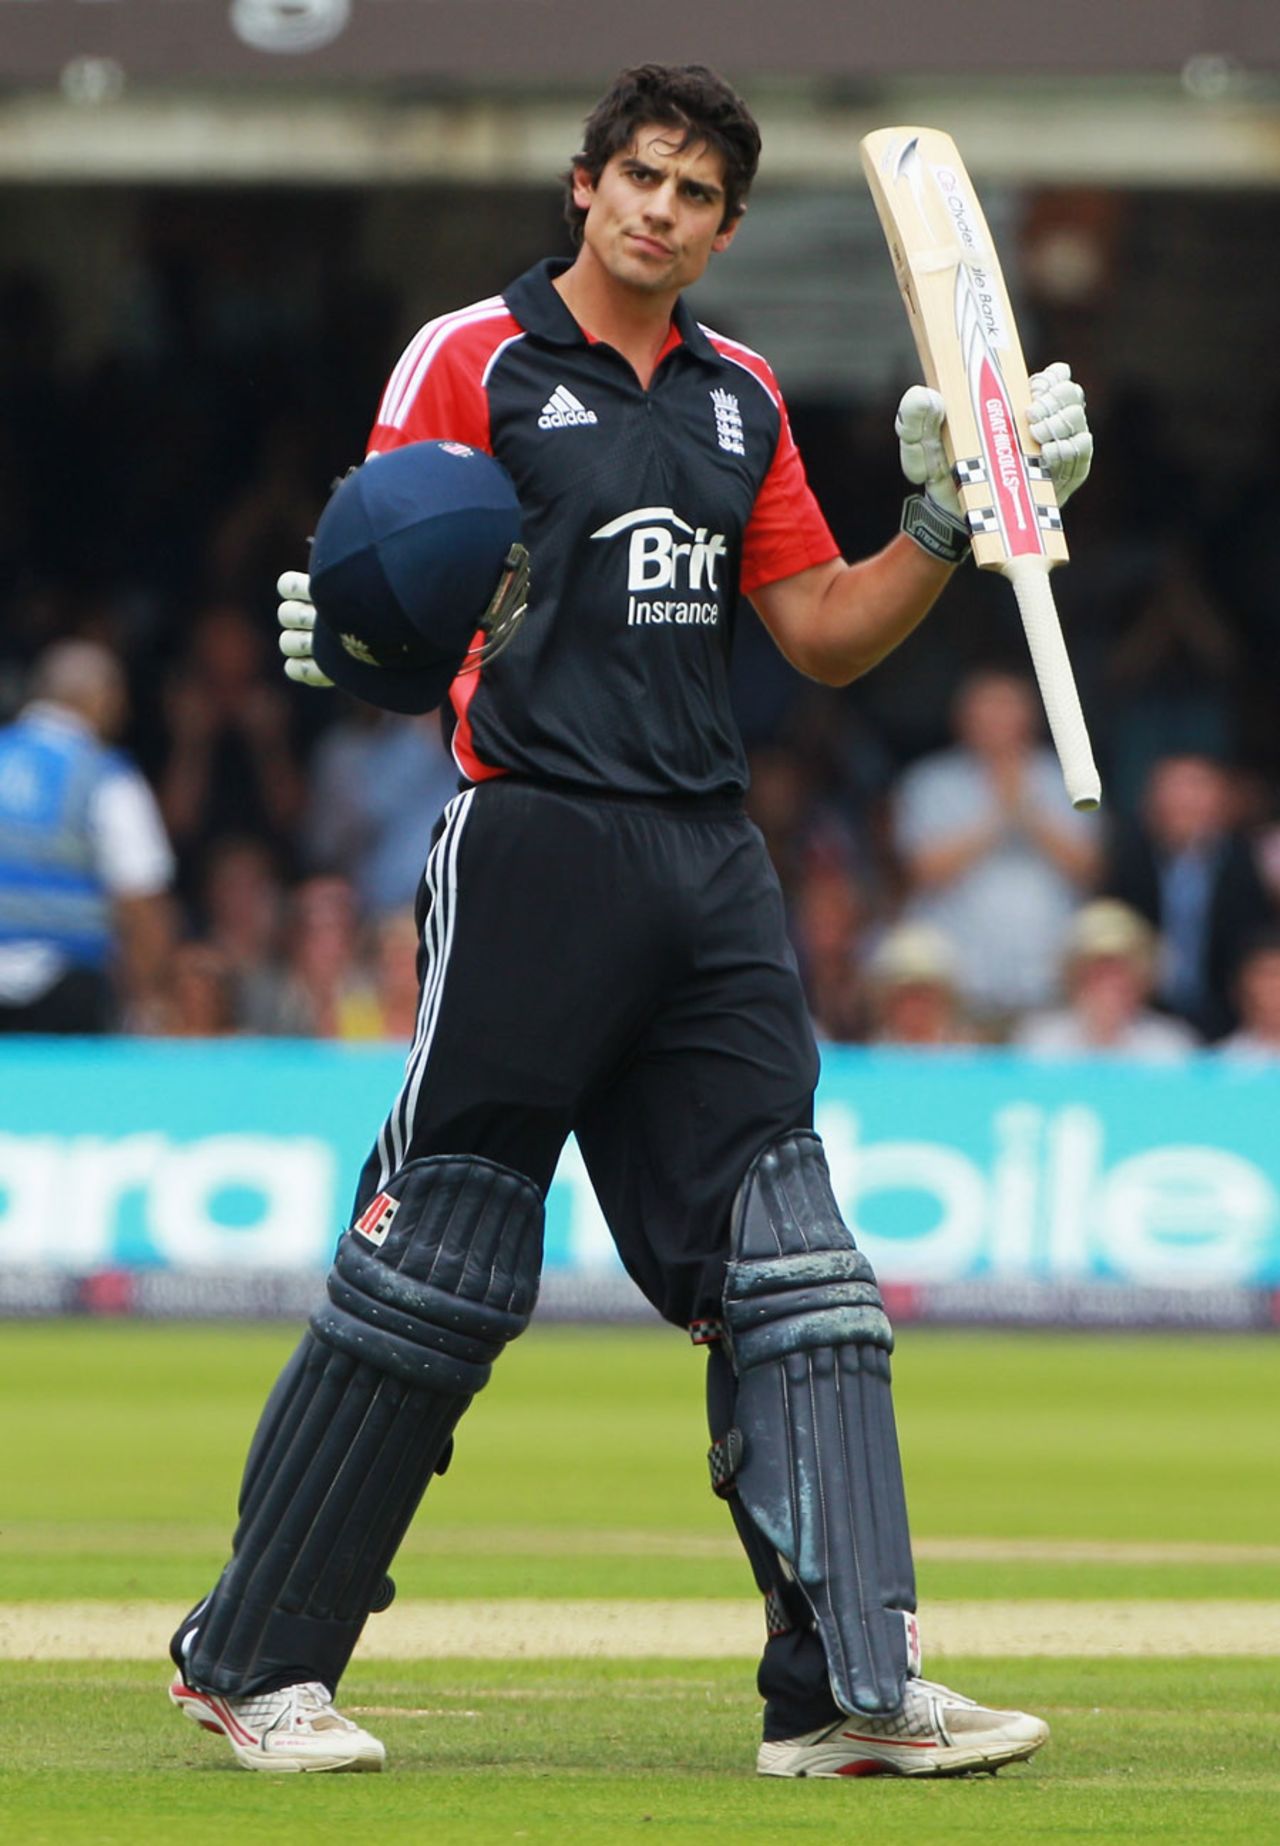 Alastair Cook brings up his second ODI century, and his first as captain, England v Sri Lanka, 3rd ODI, Lord's July 3 2011